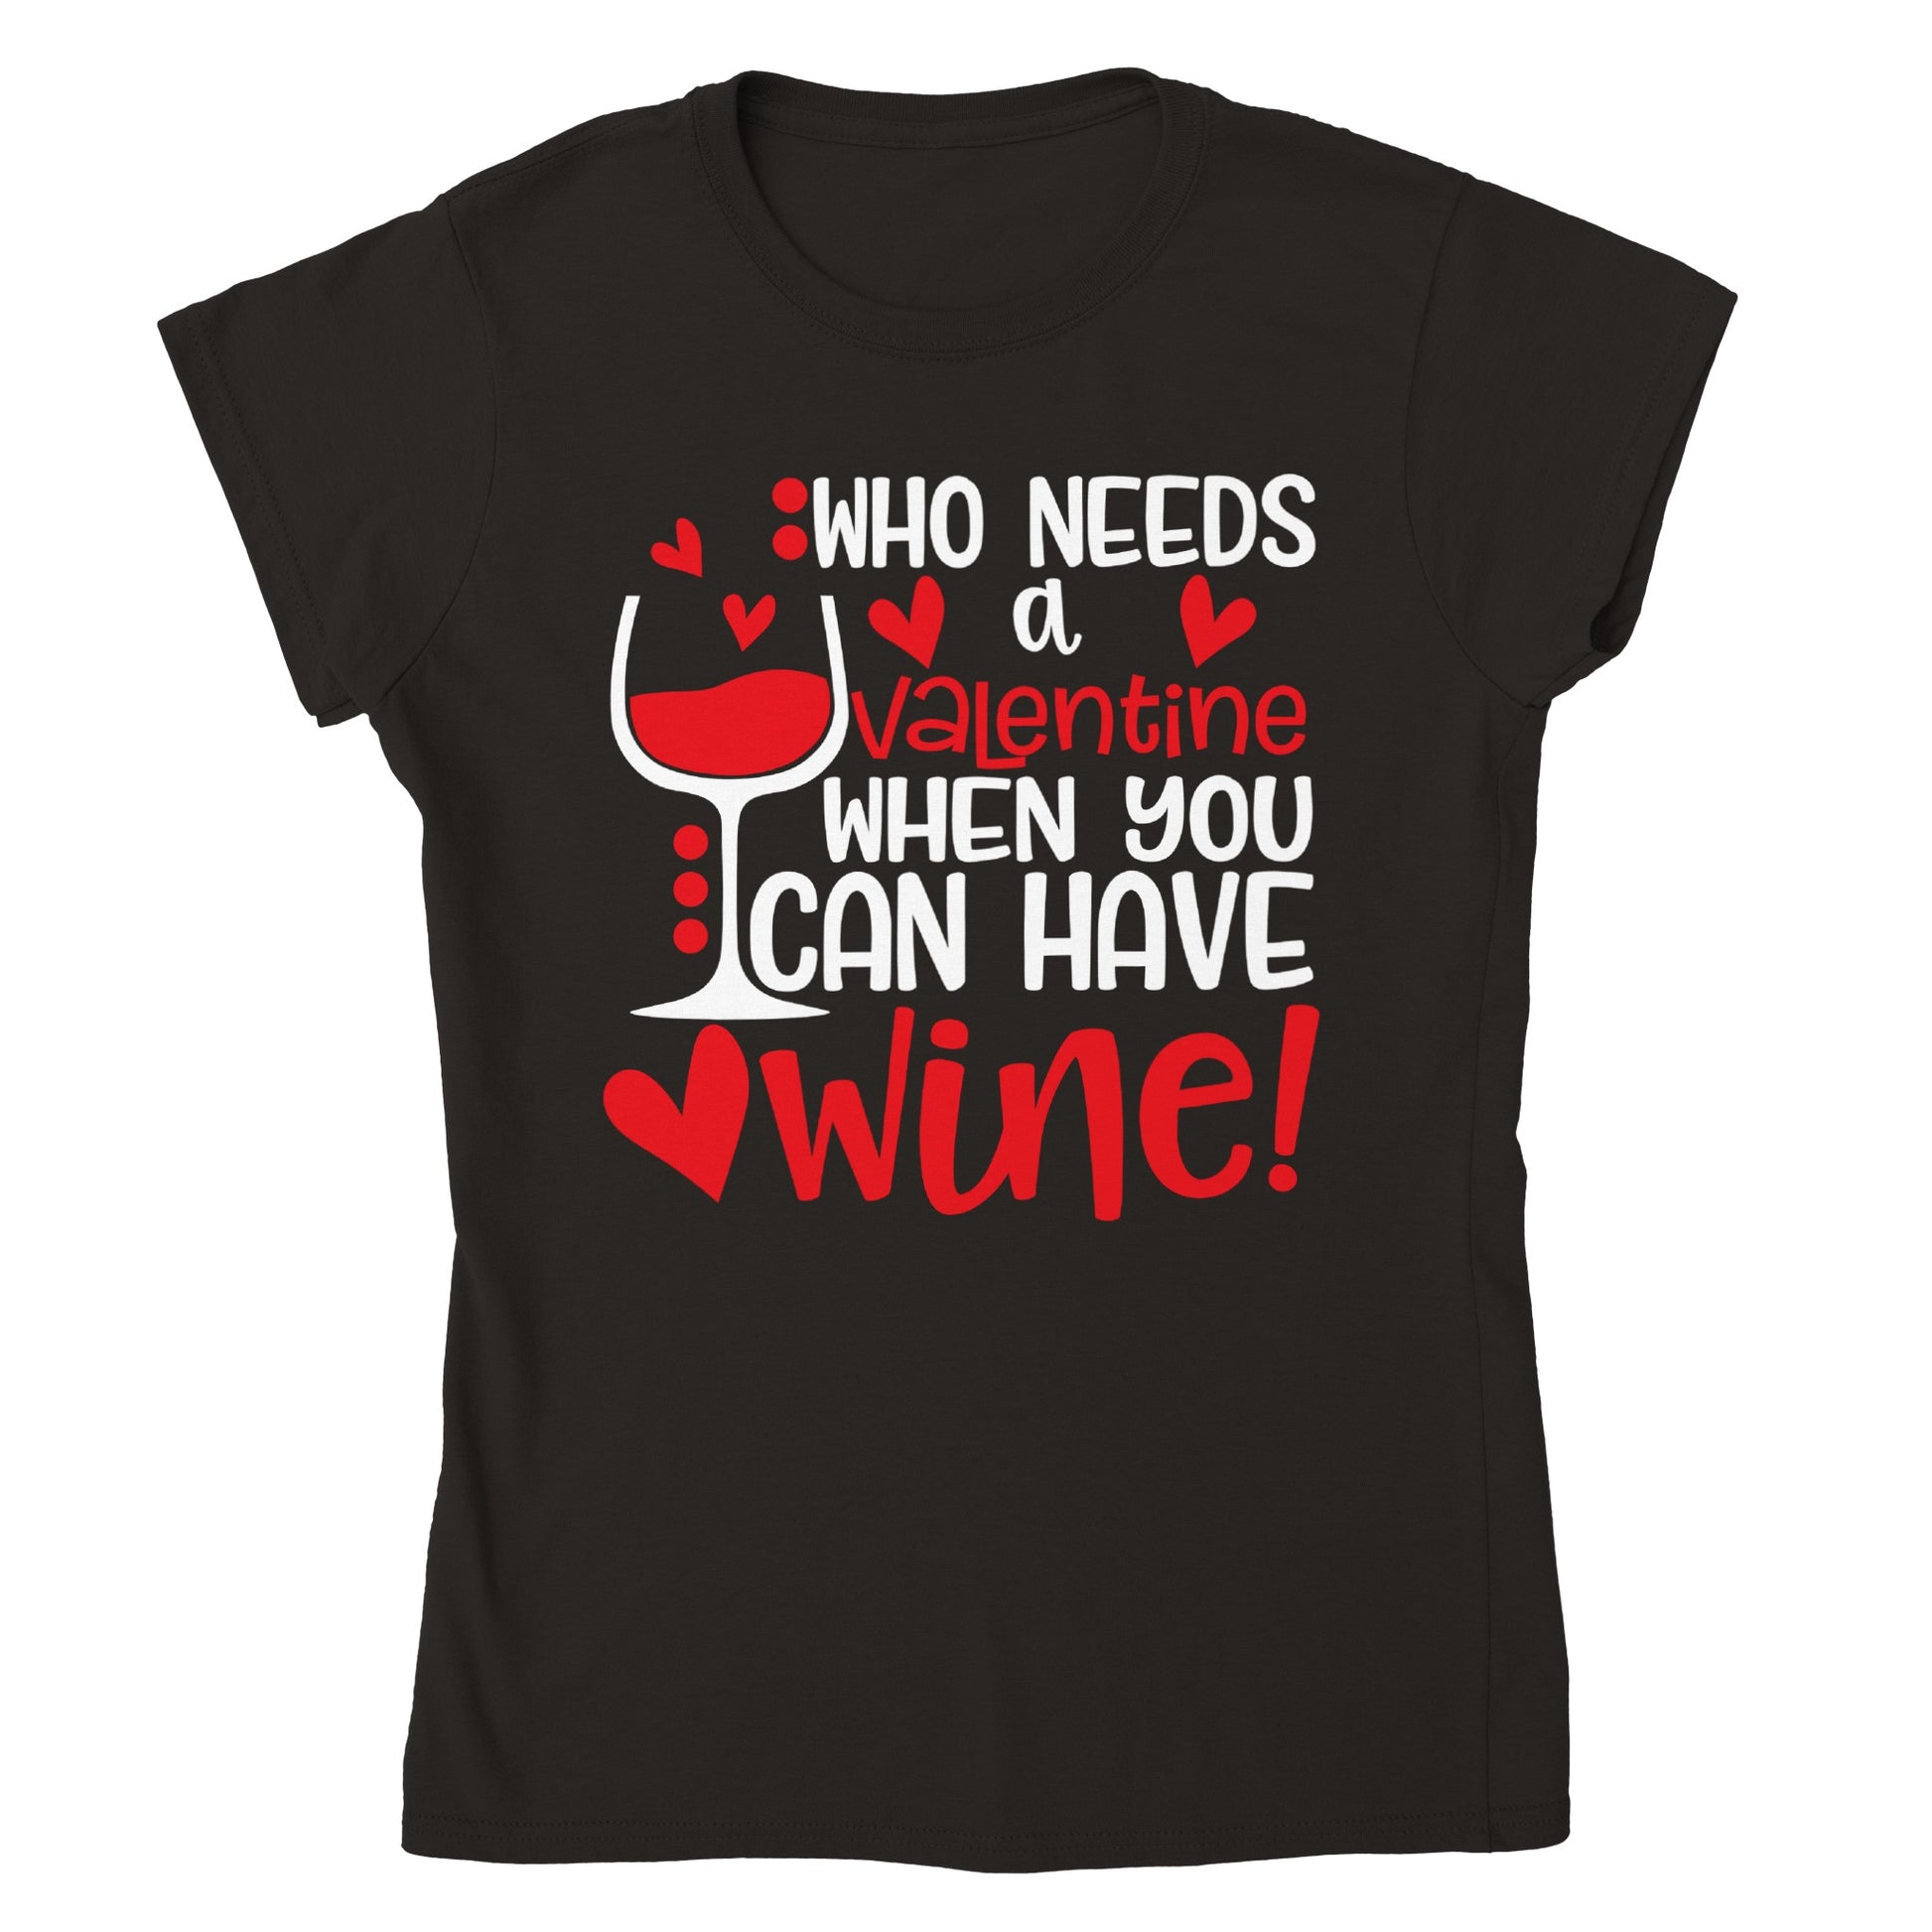 Who Needs a Valentine... Classic Womens Crewneck T-shirt - Mister Snarky's